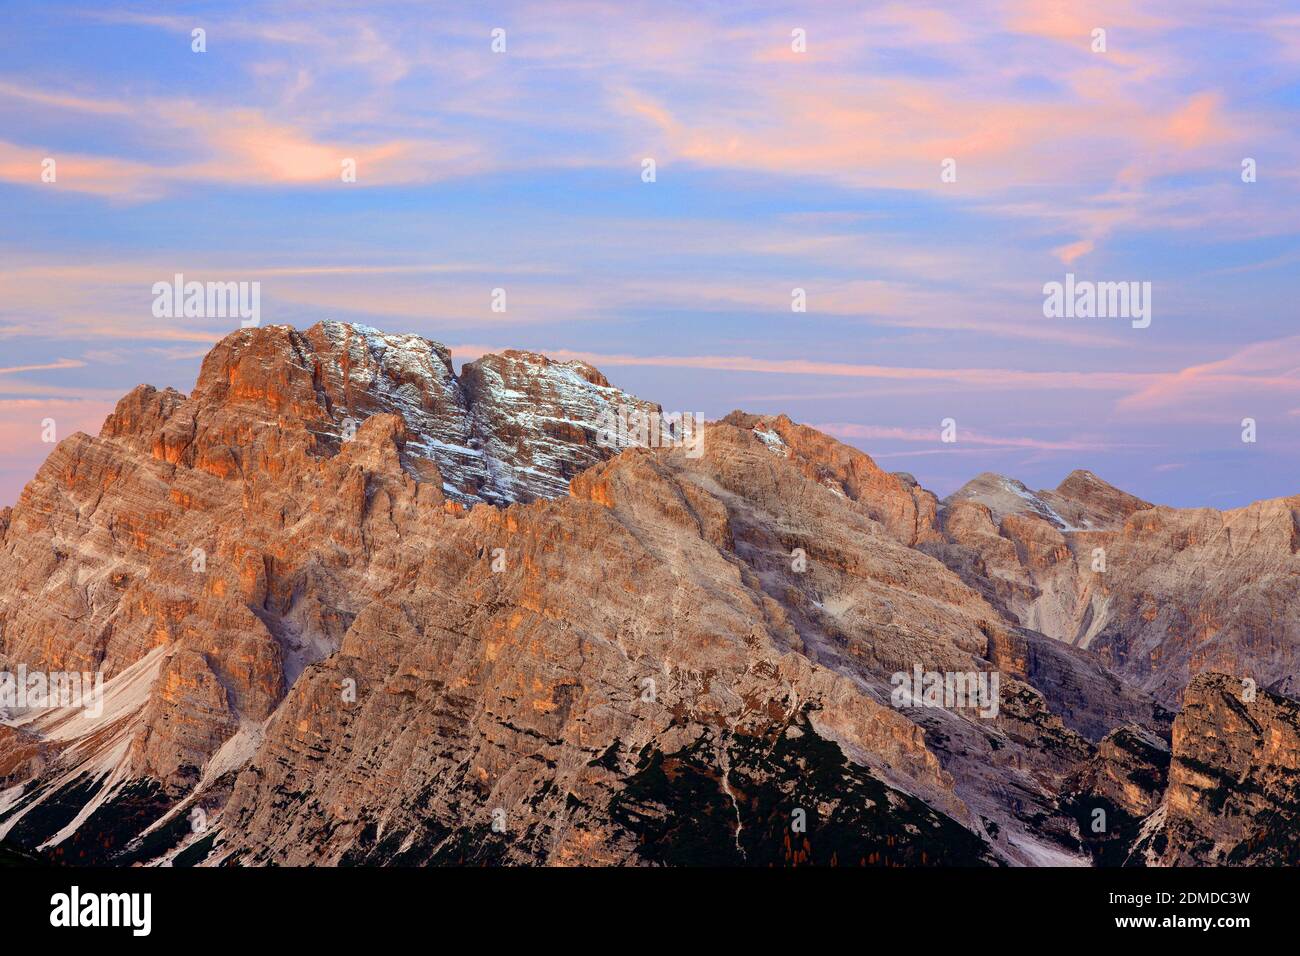 Rock Formation On Landscape Against Sky During Sunset Stock Photo